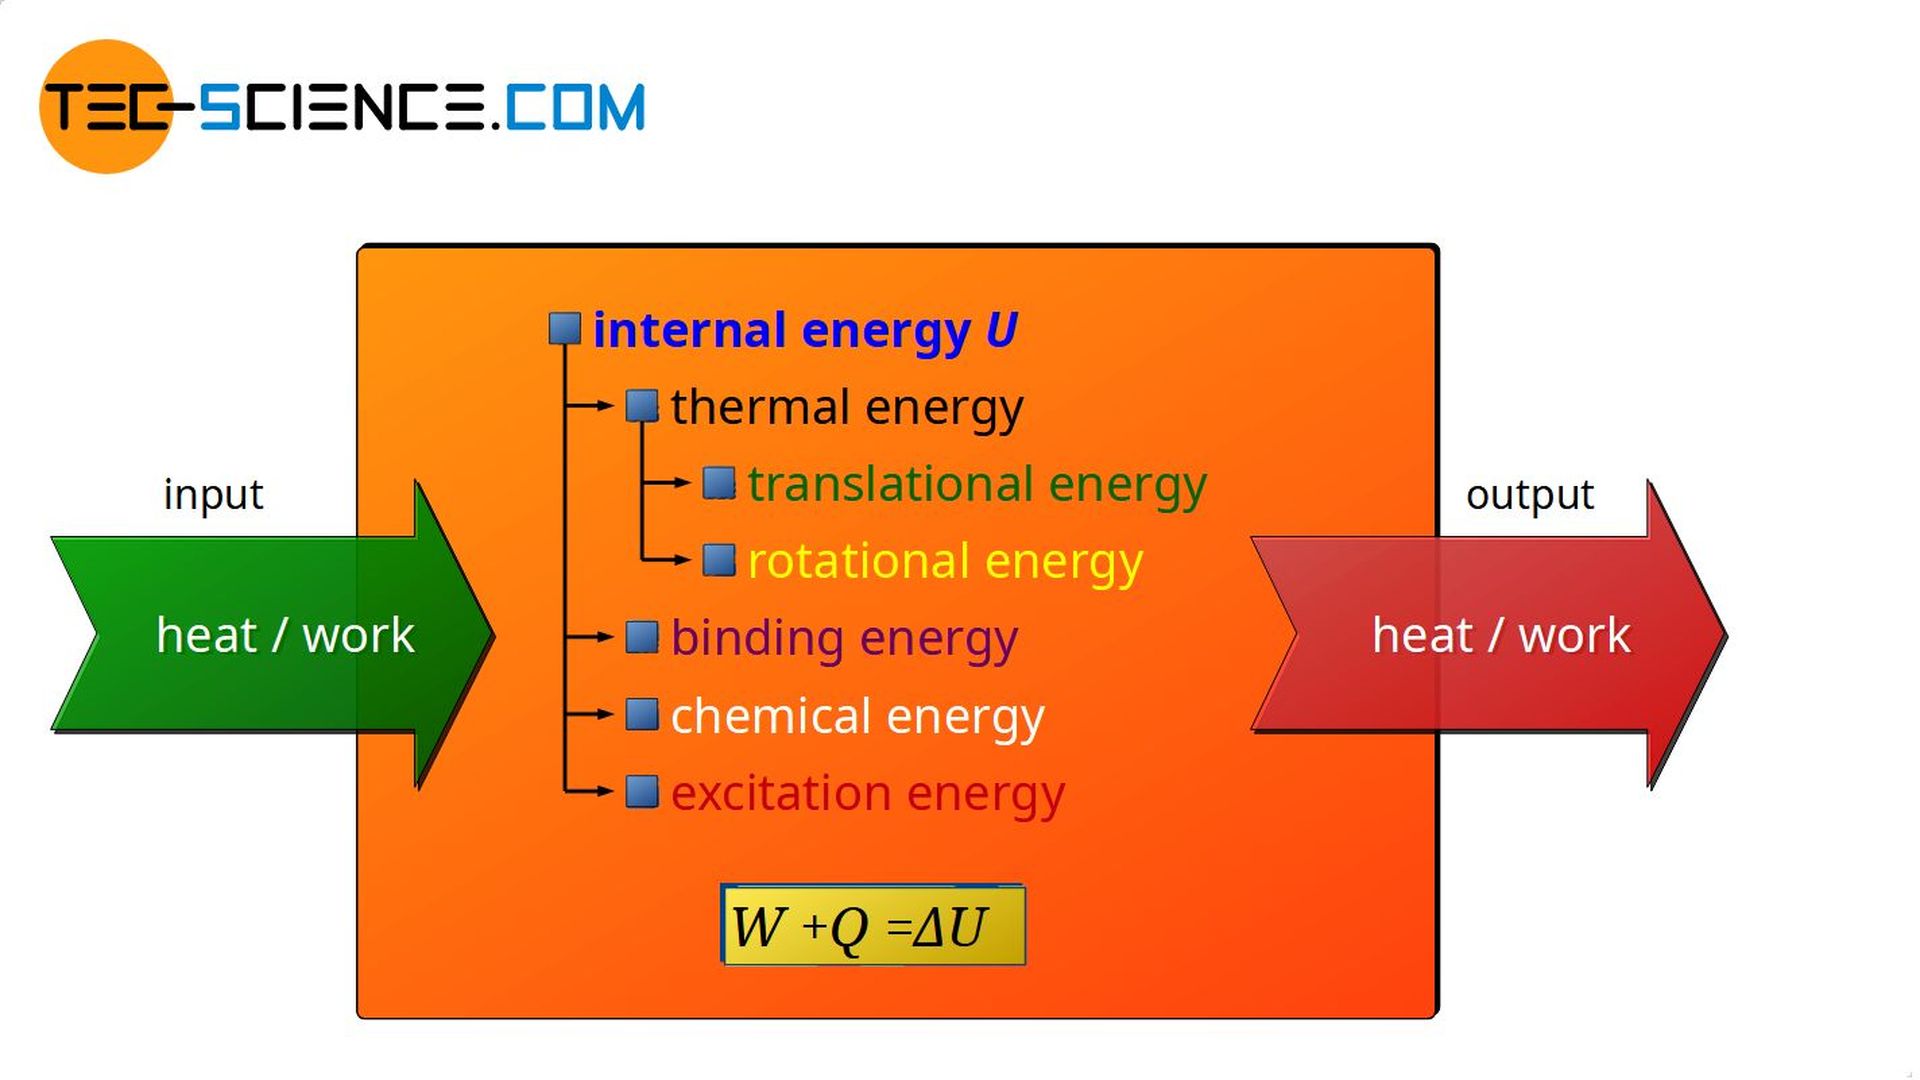 First law of thermodynamics (conservation of energy)